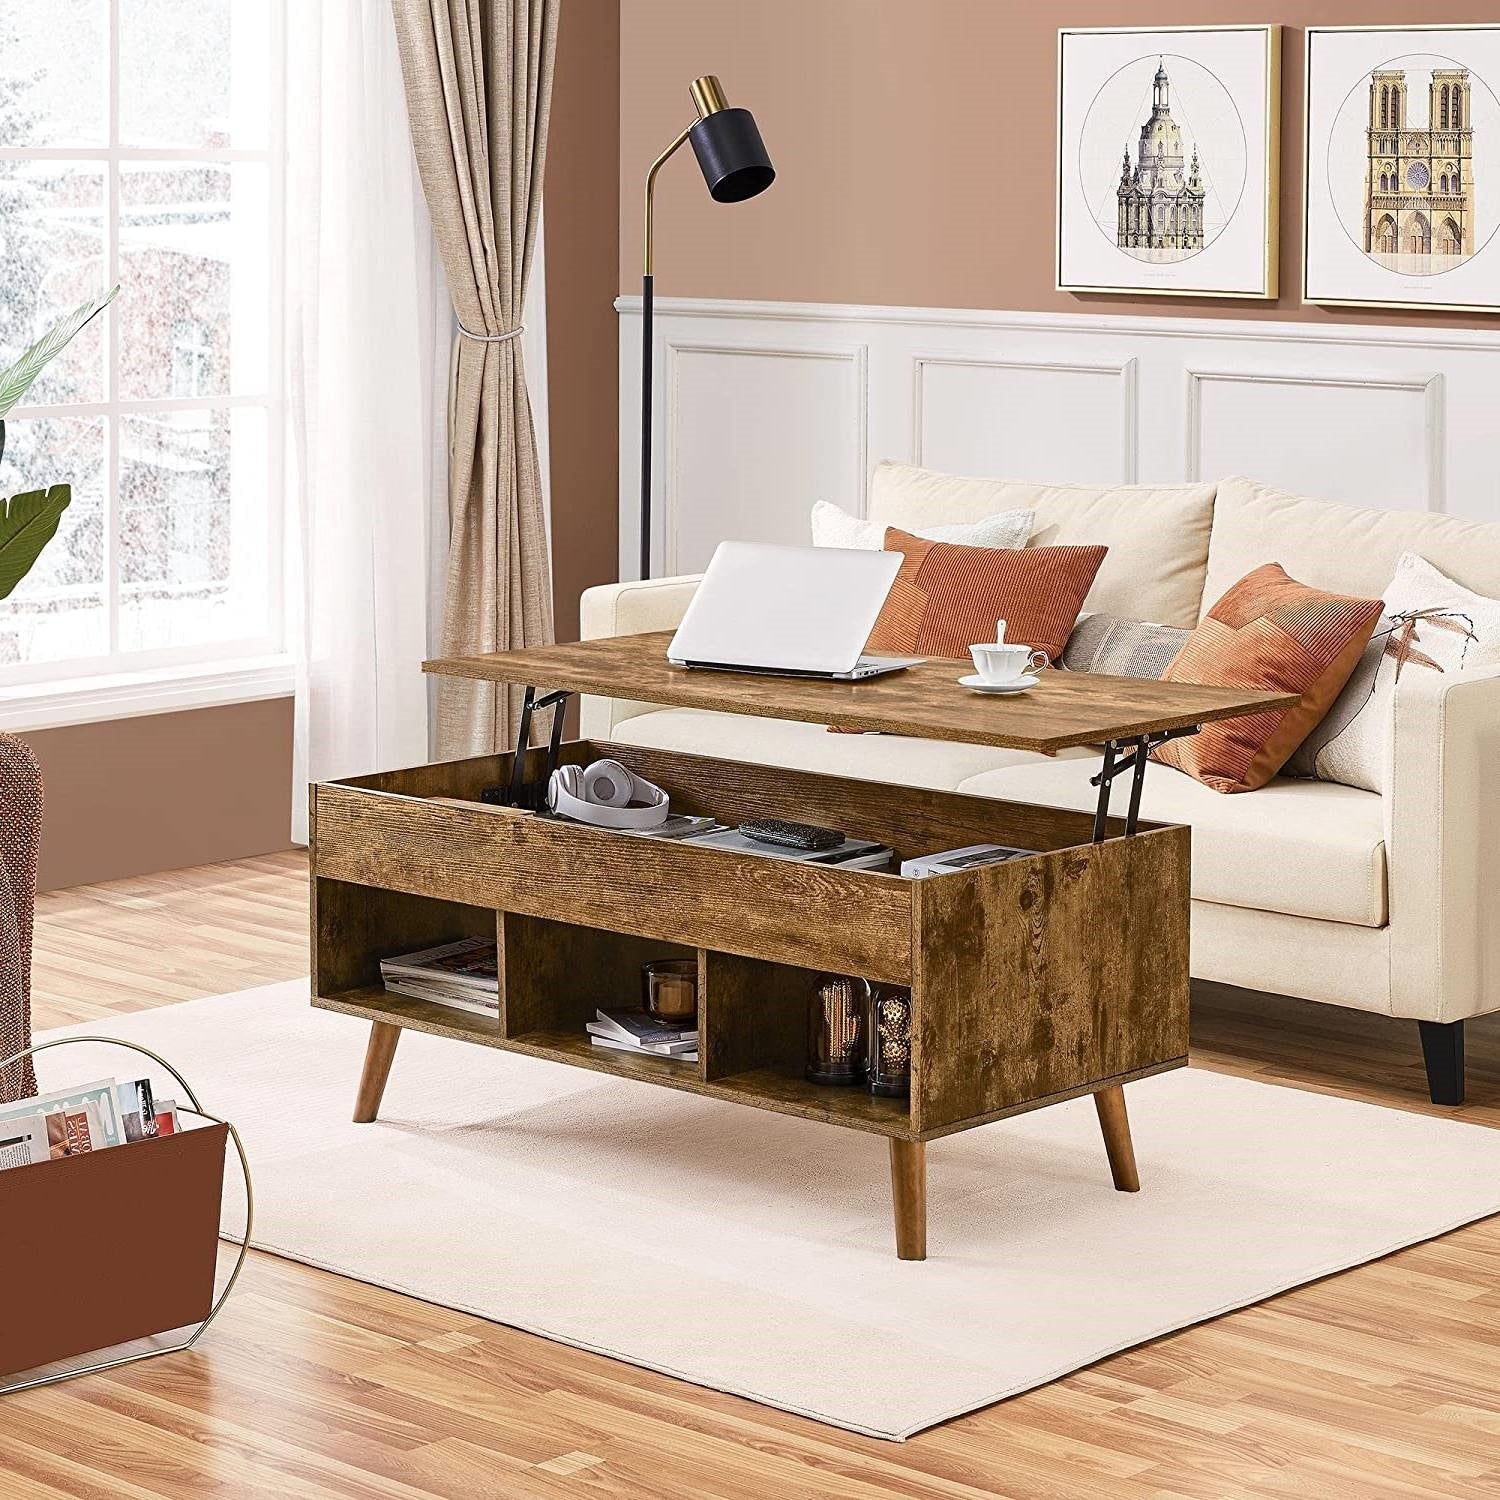 Living Room > Coffee Tables - Mid-Century Lift-Top Coffee Table Sofa Laptop Desk In Rustic Brown Wood Finish